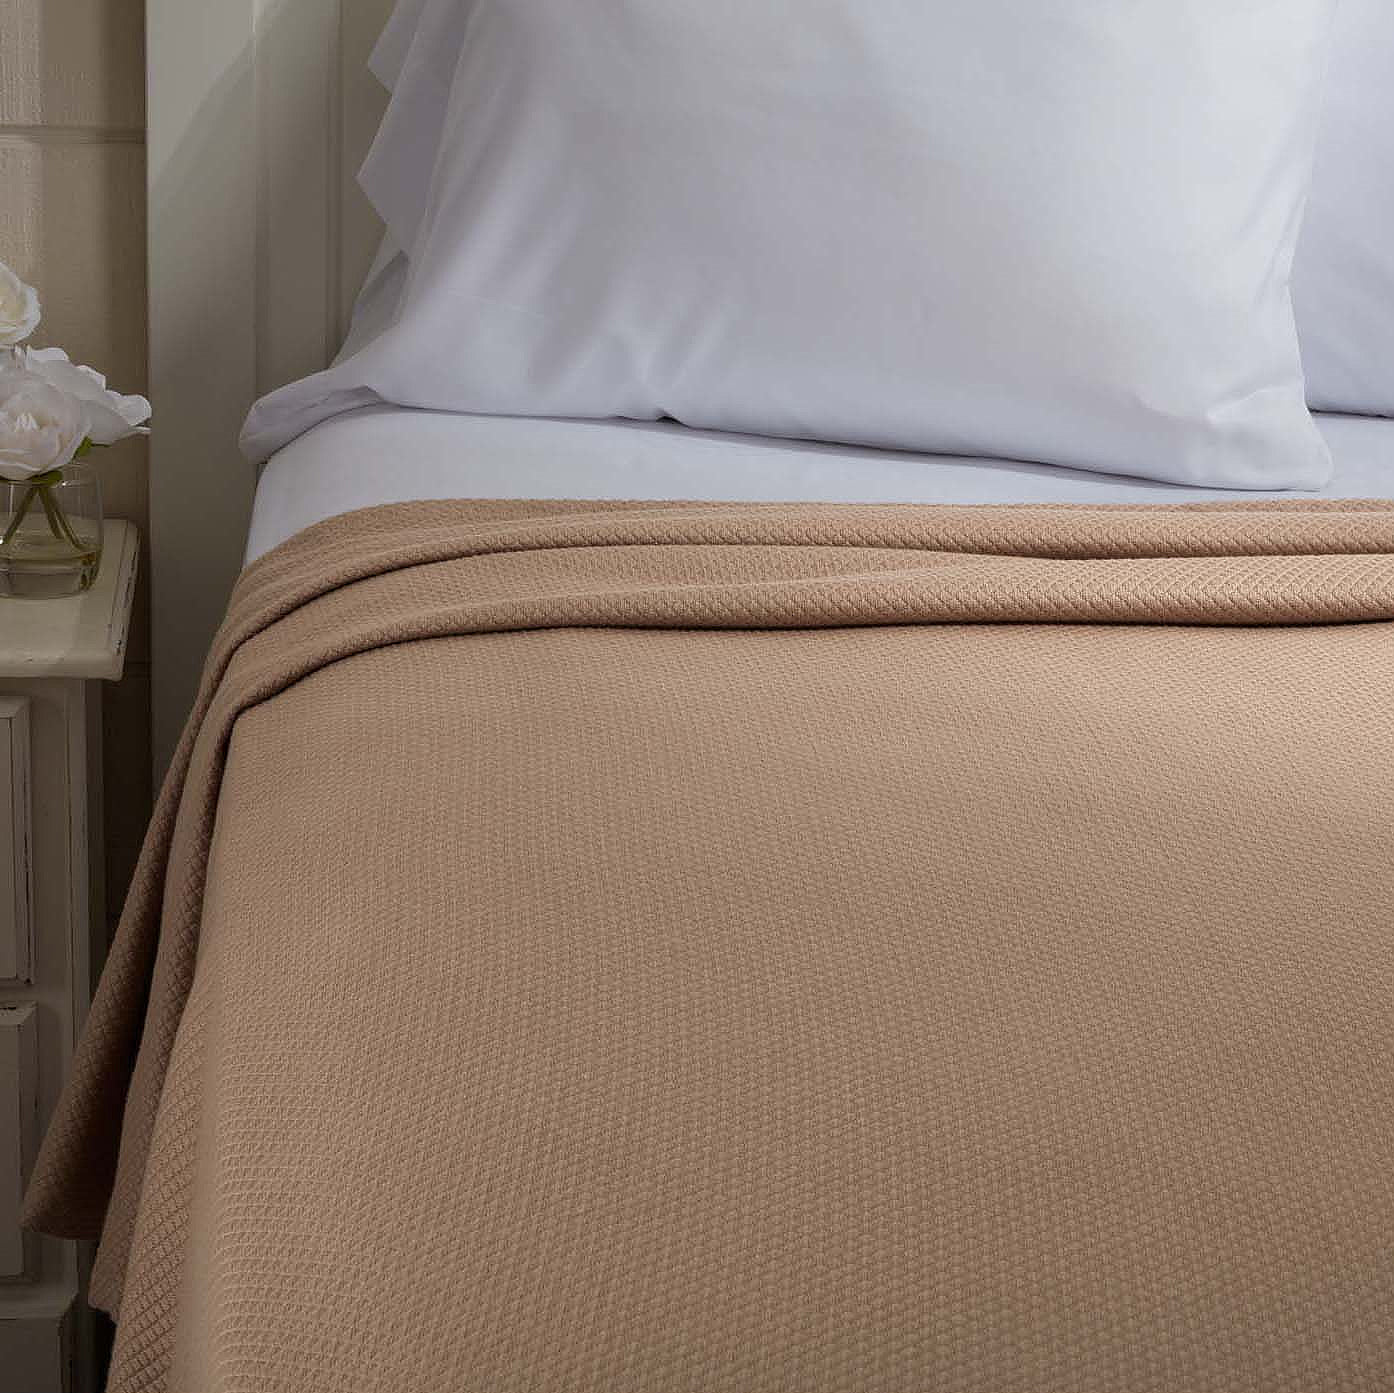 Serenity Tan Twin Cotton Woven Blanket 90"x62" VHC Brands